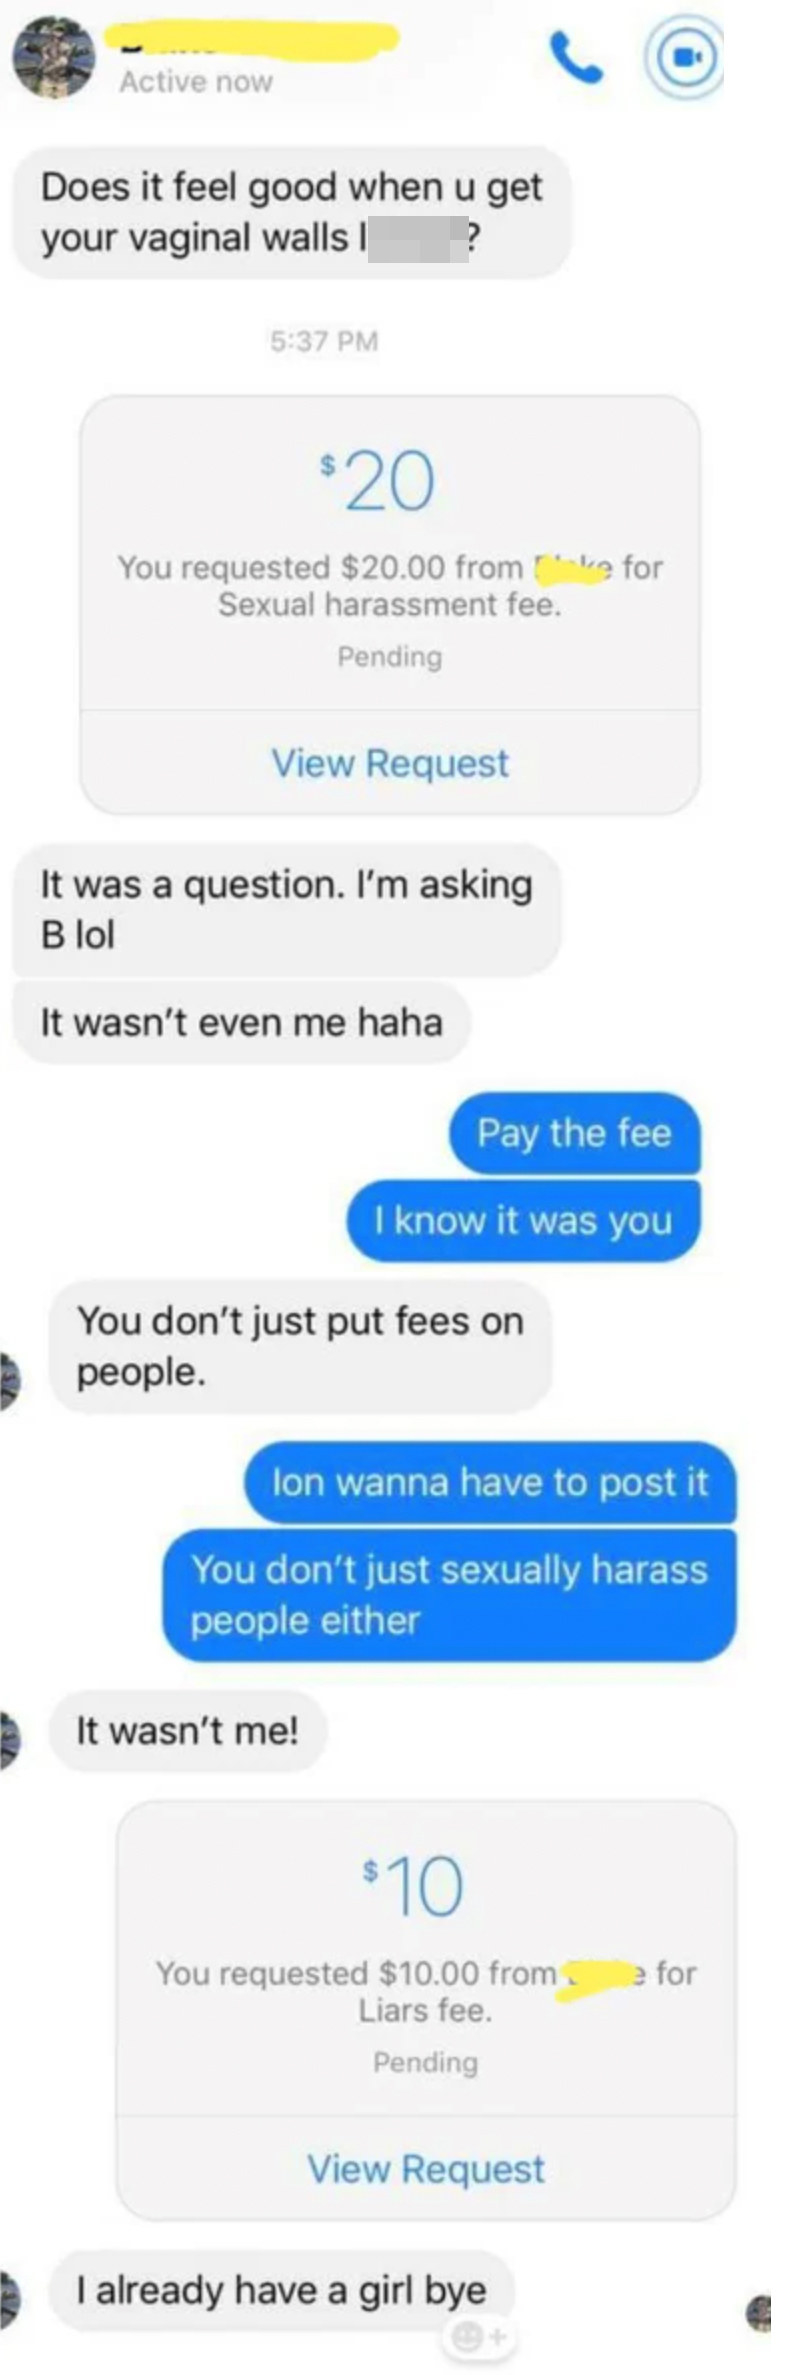 Someone sexually harasses someone so she charges him harassment fees